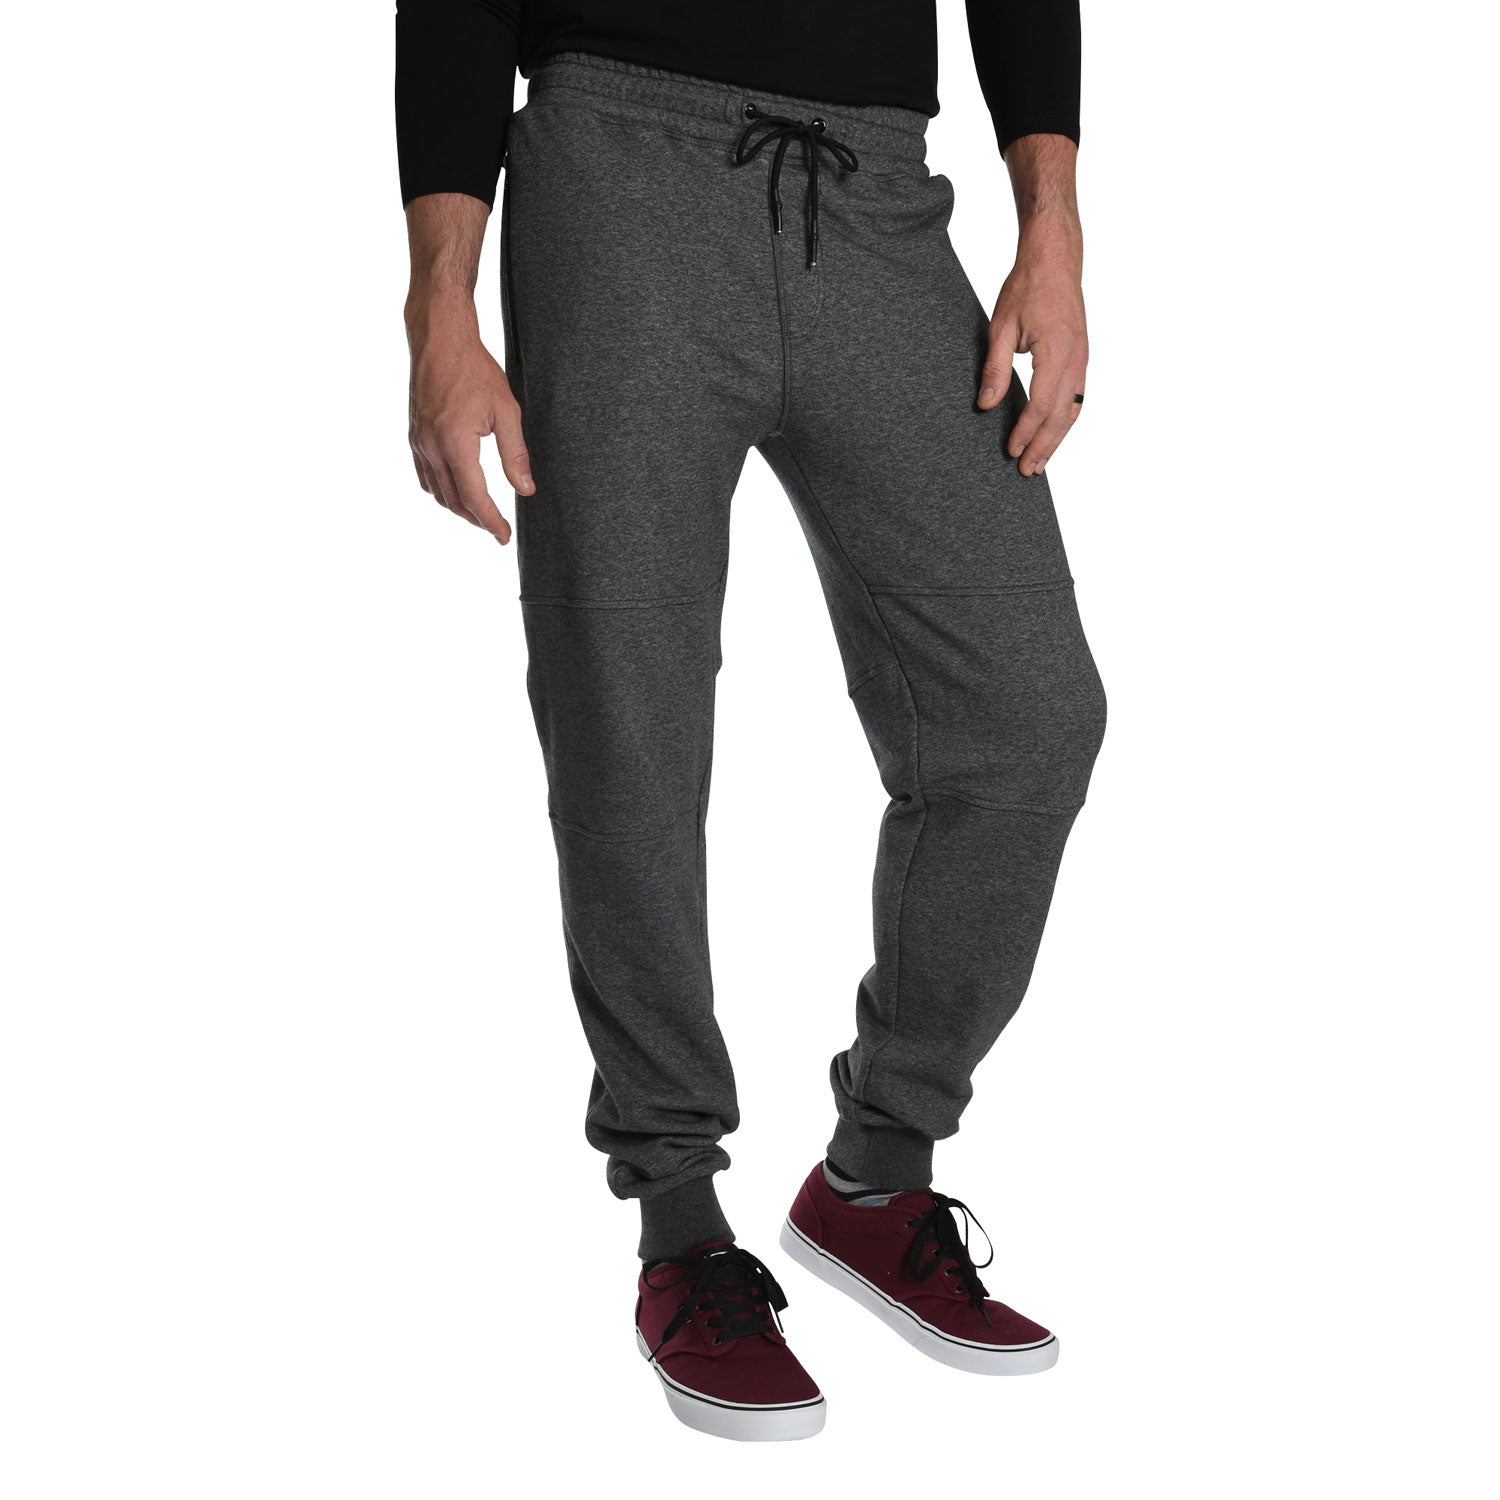 Tall Men's Joggers in Charcoal 